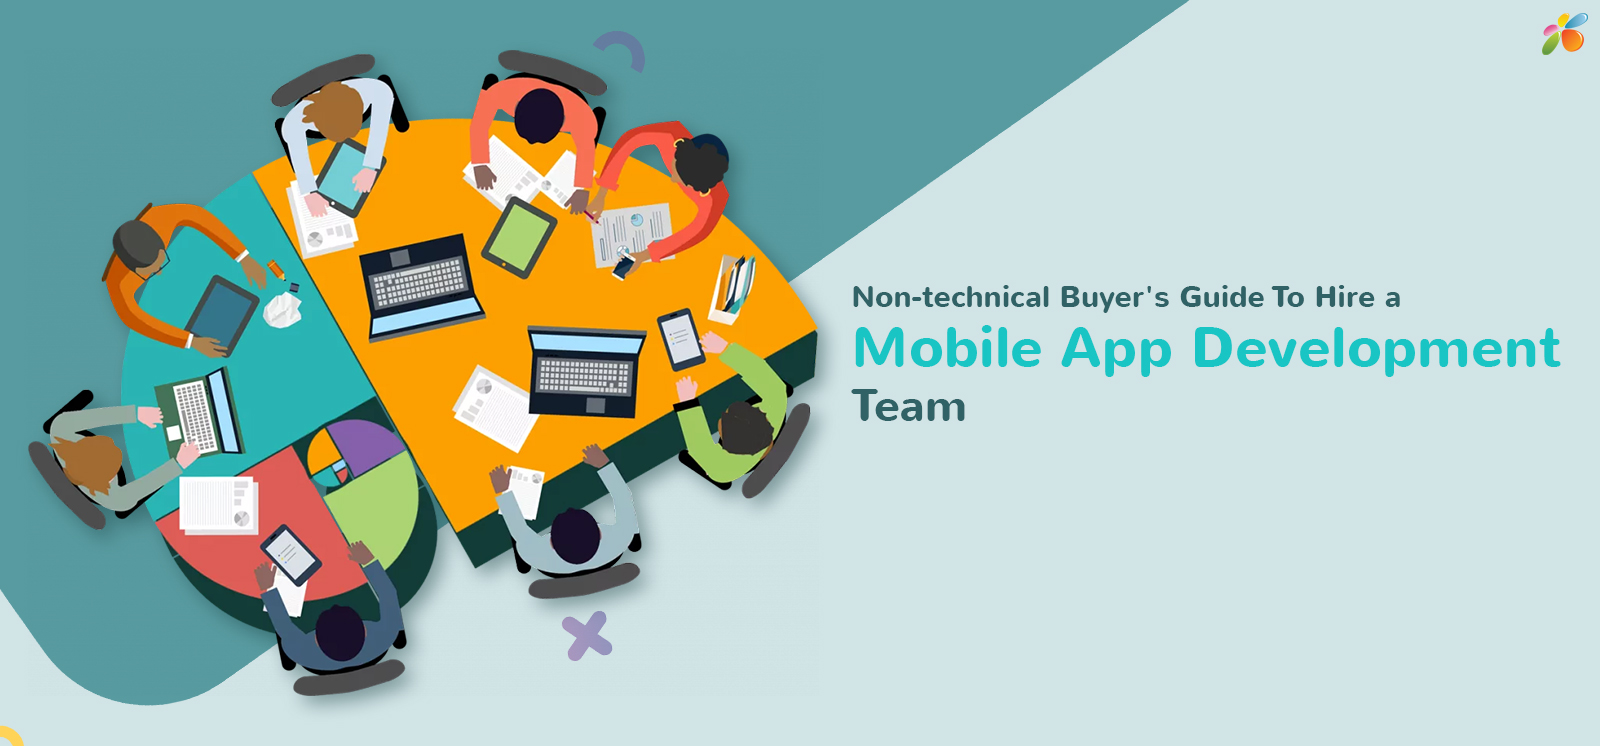 Non-technical Buyer’s Guide To Hire A Mobile App Development Team